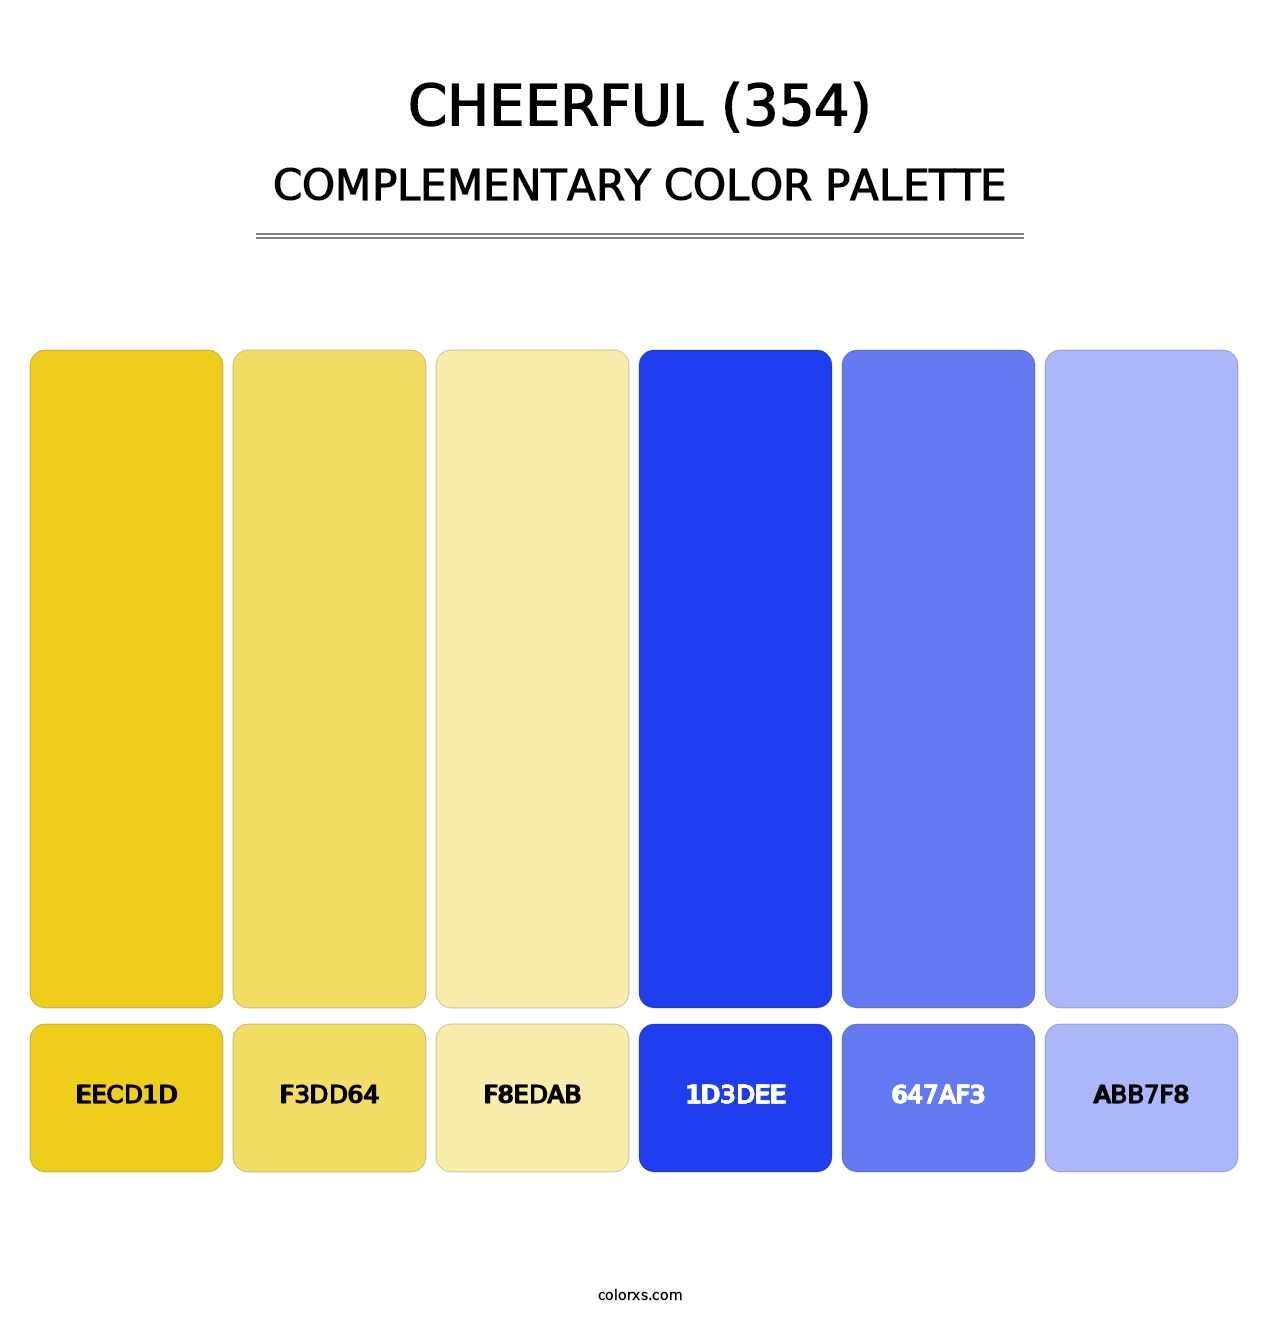 Cheerful (354) - Complementary Color Palette